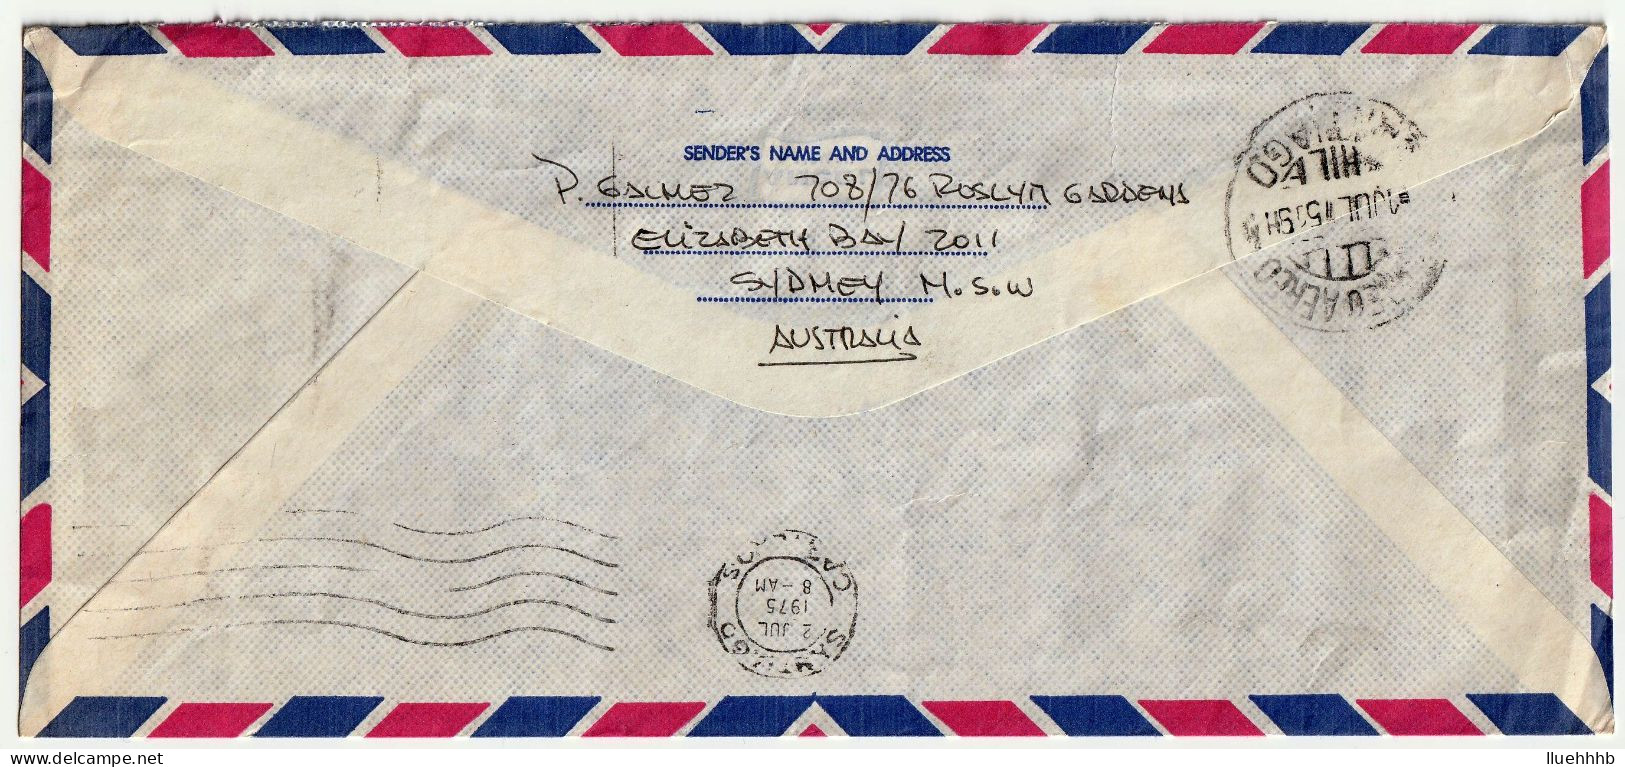 AUSTRALIA: 35c Aboriginal Art Solo Usage In 1975 Airmail Cover To CHILE - Covers & Documents